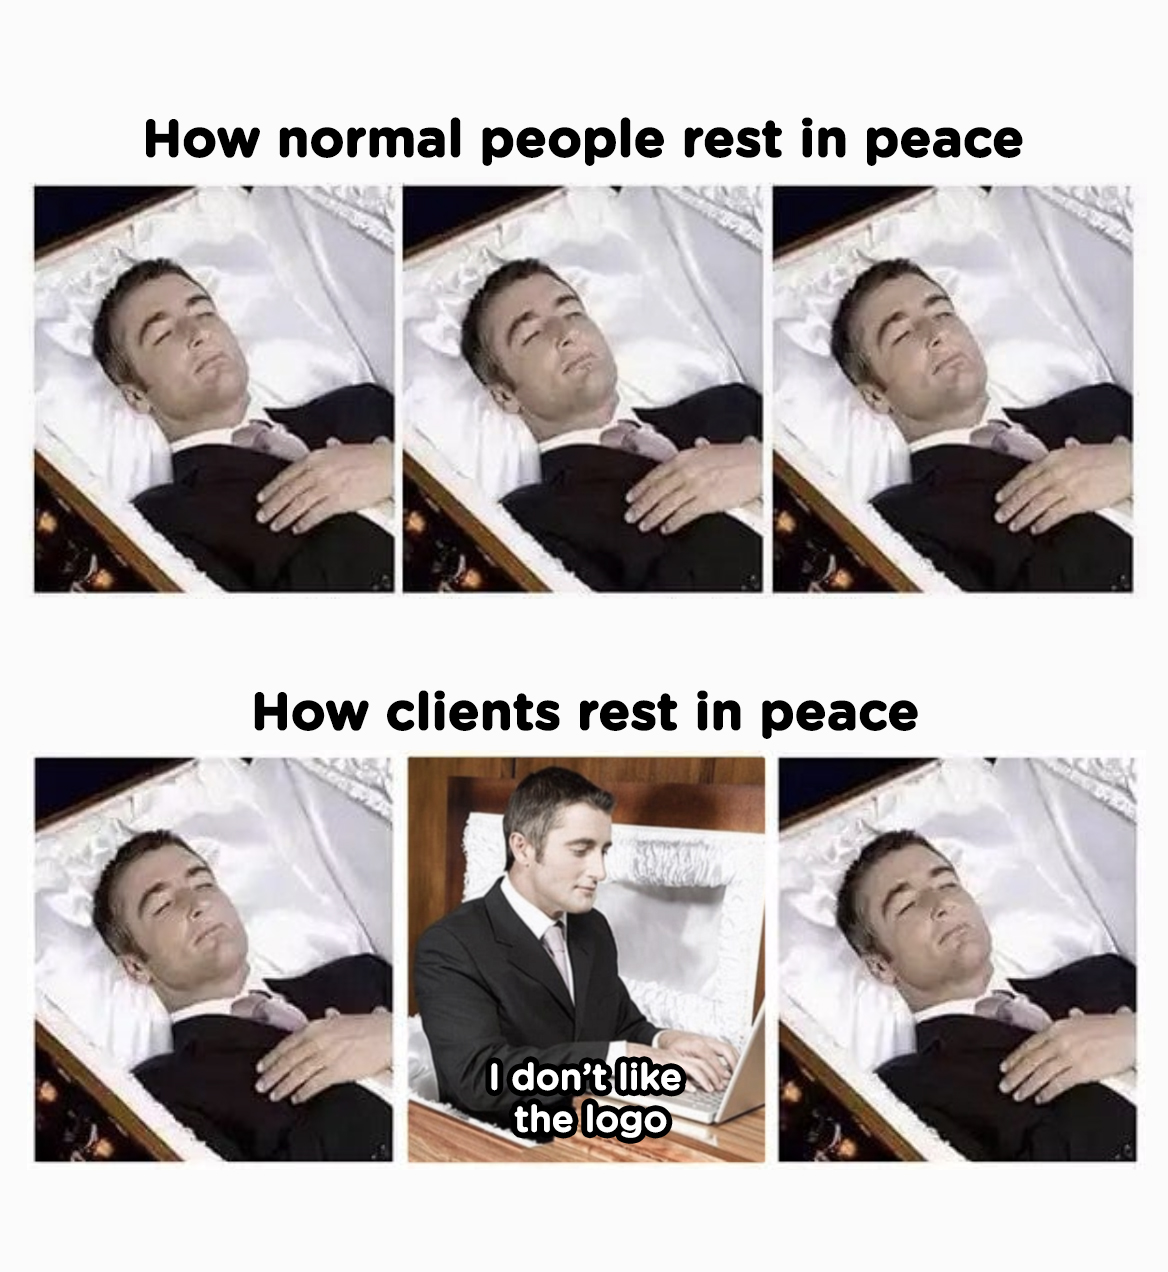 How normal people rest in peace vs. How clients rest in peace